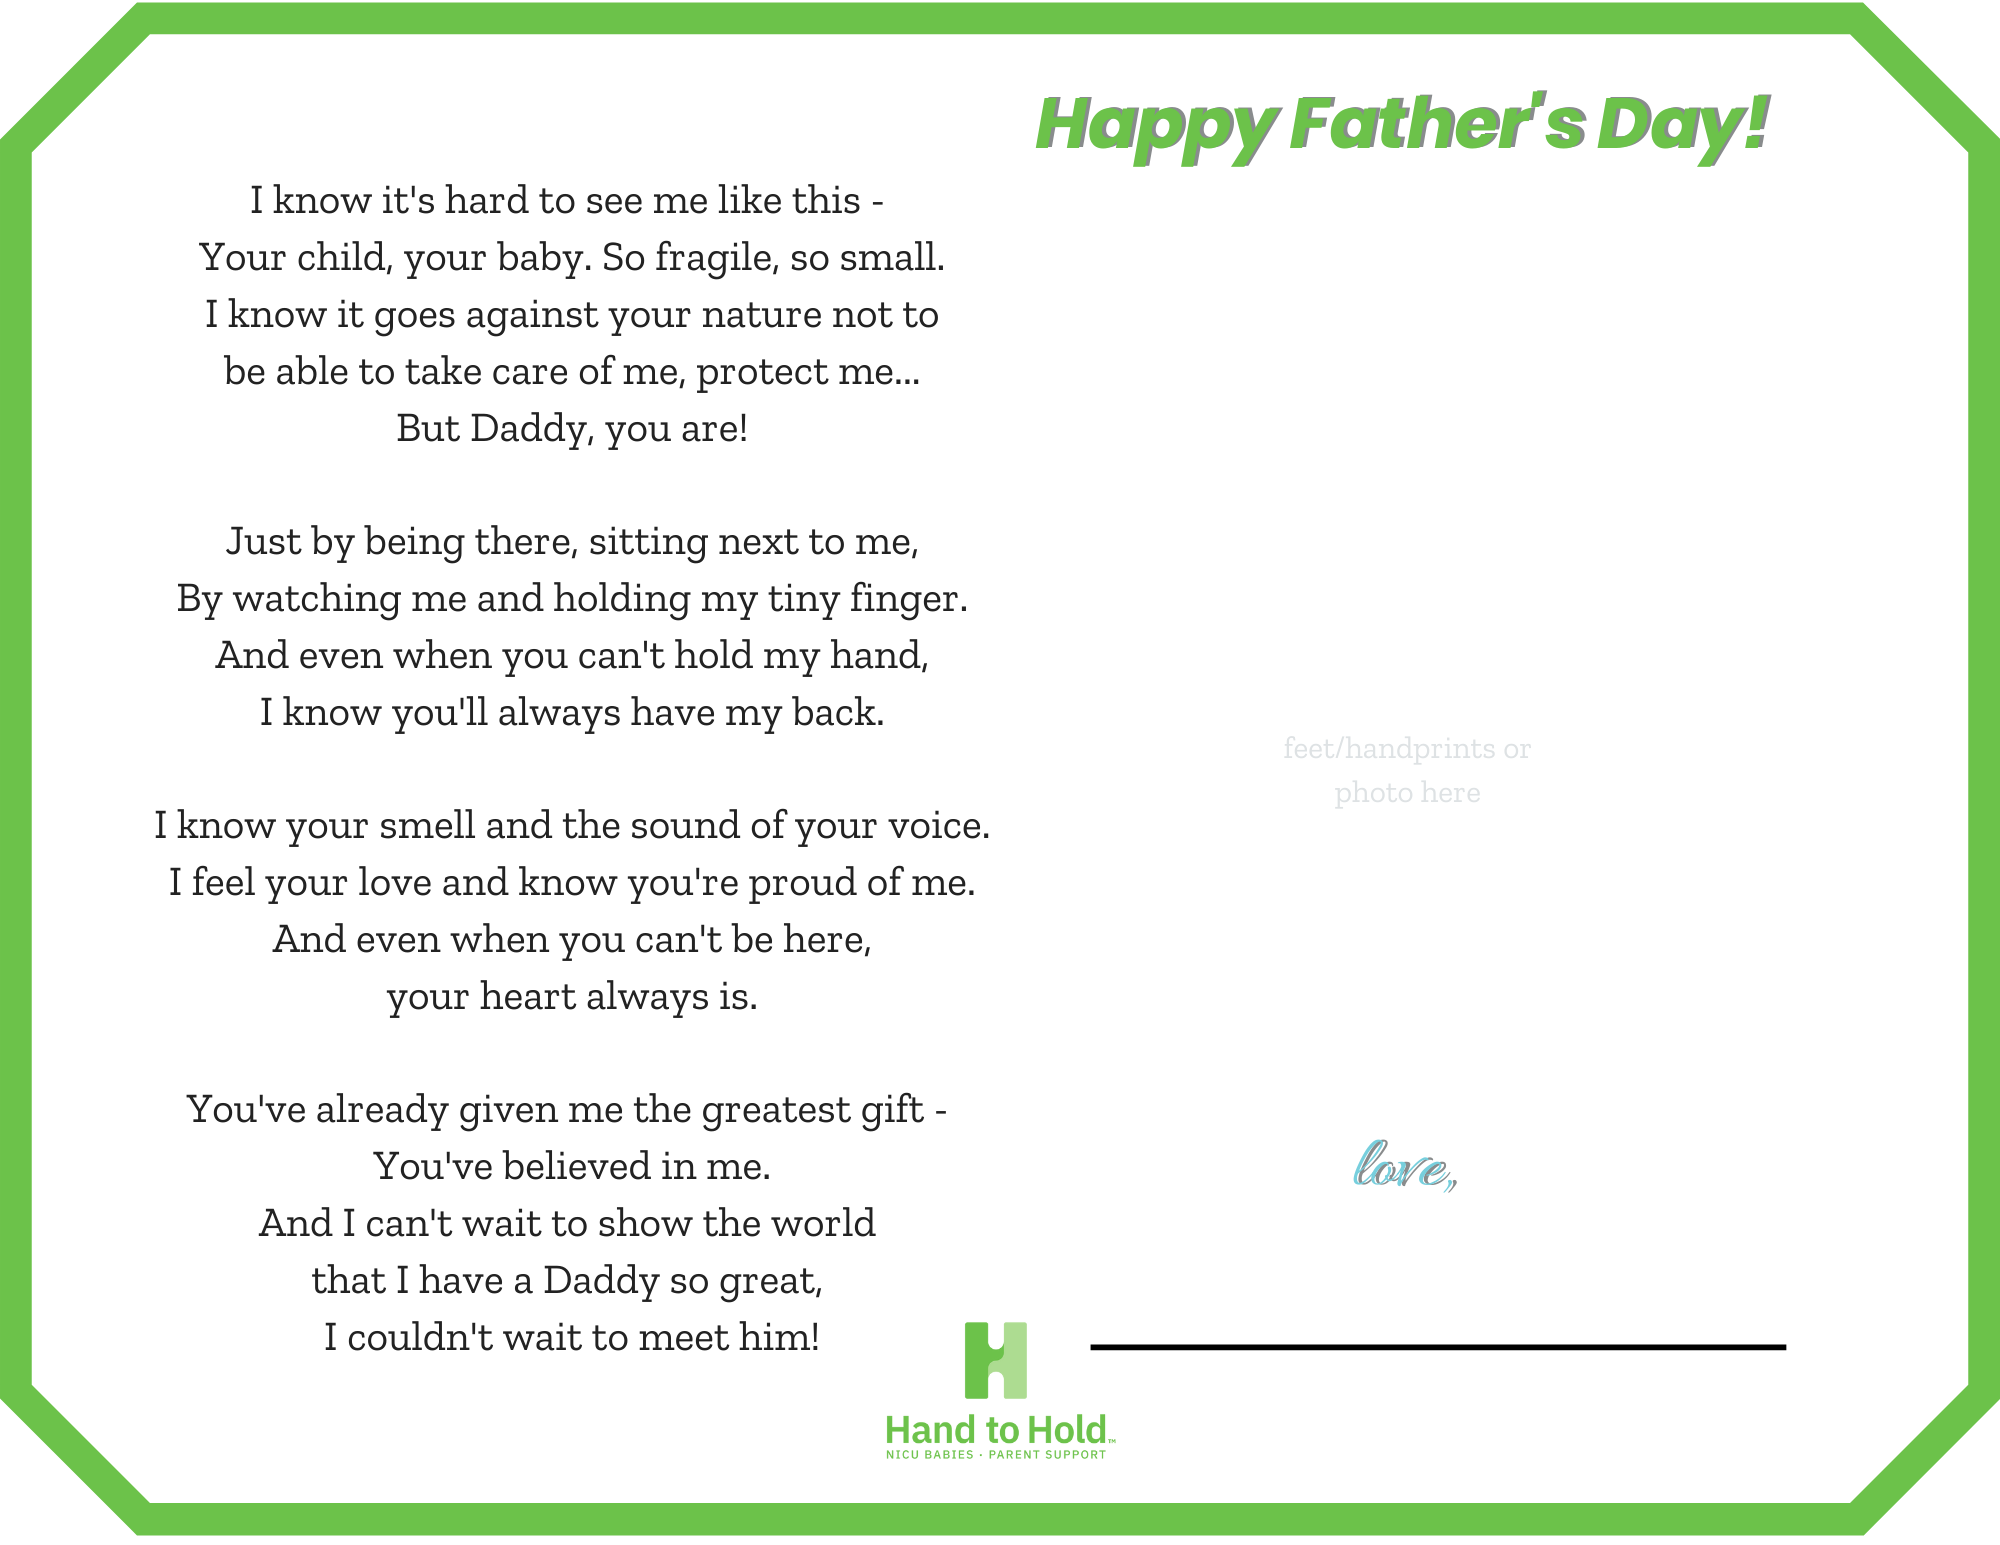 Father's Day printable, hand to hold